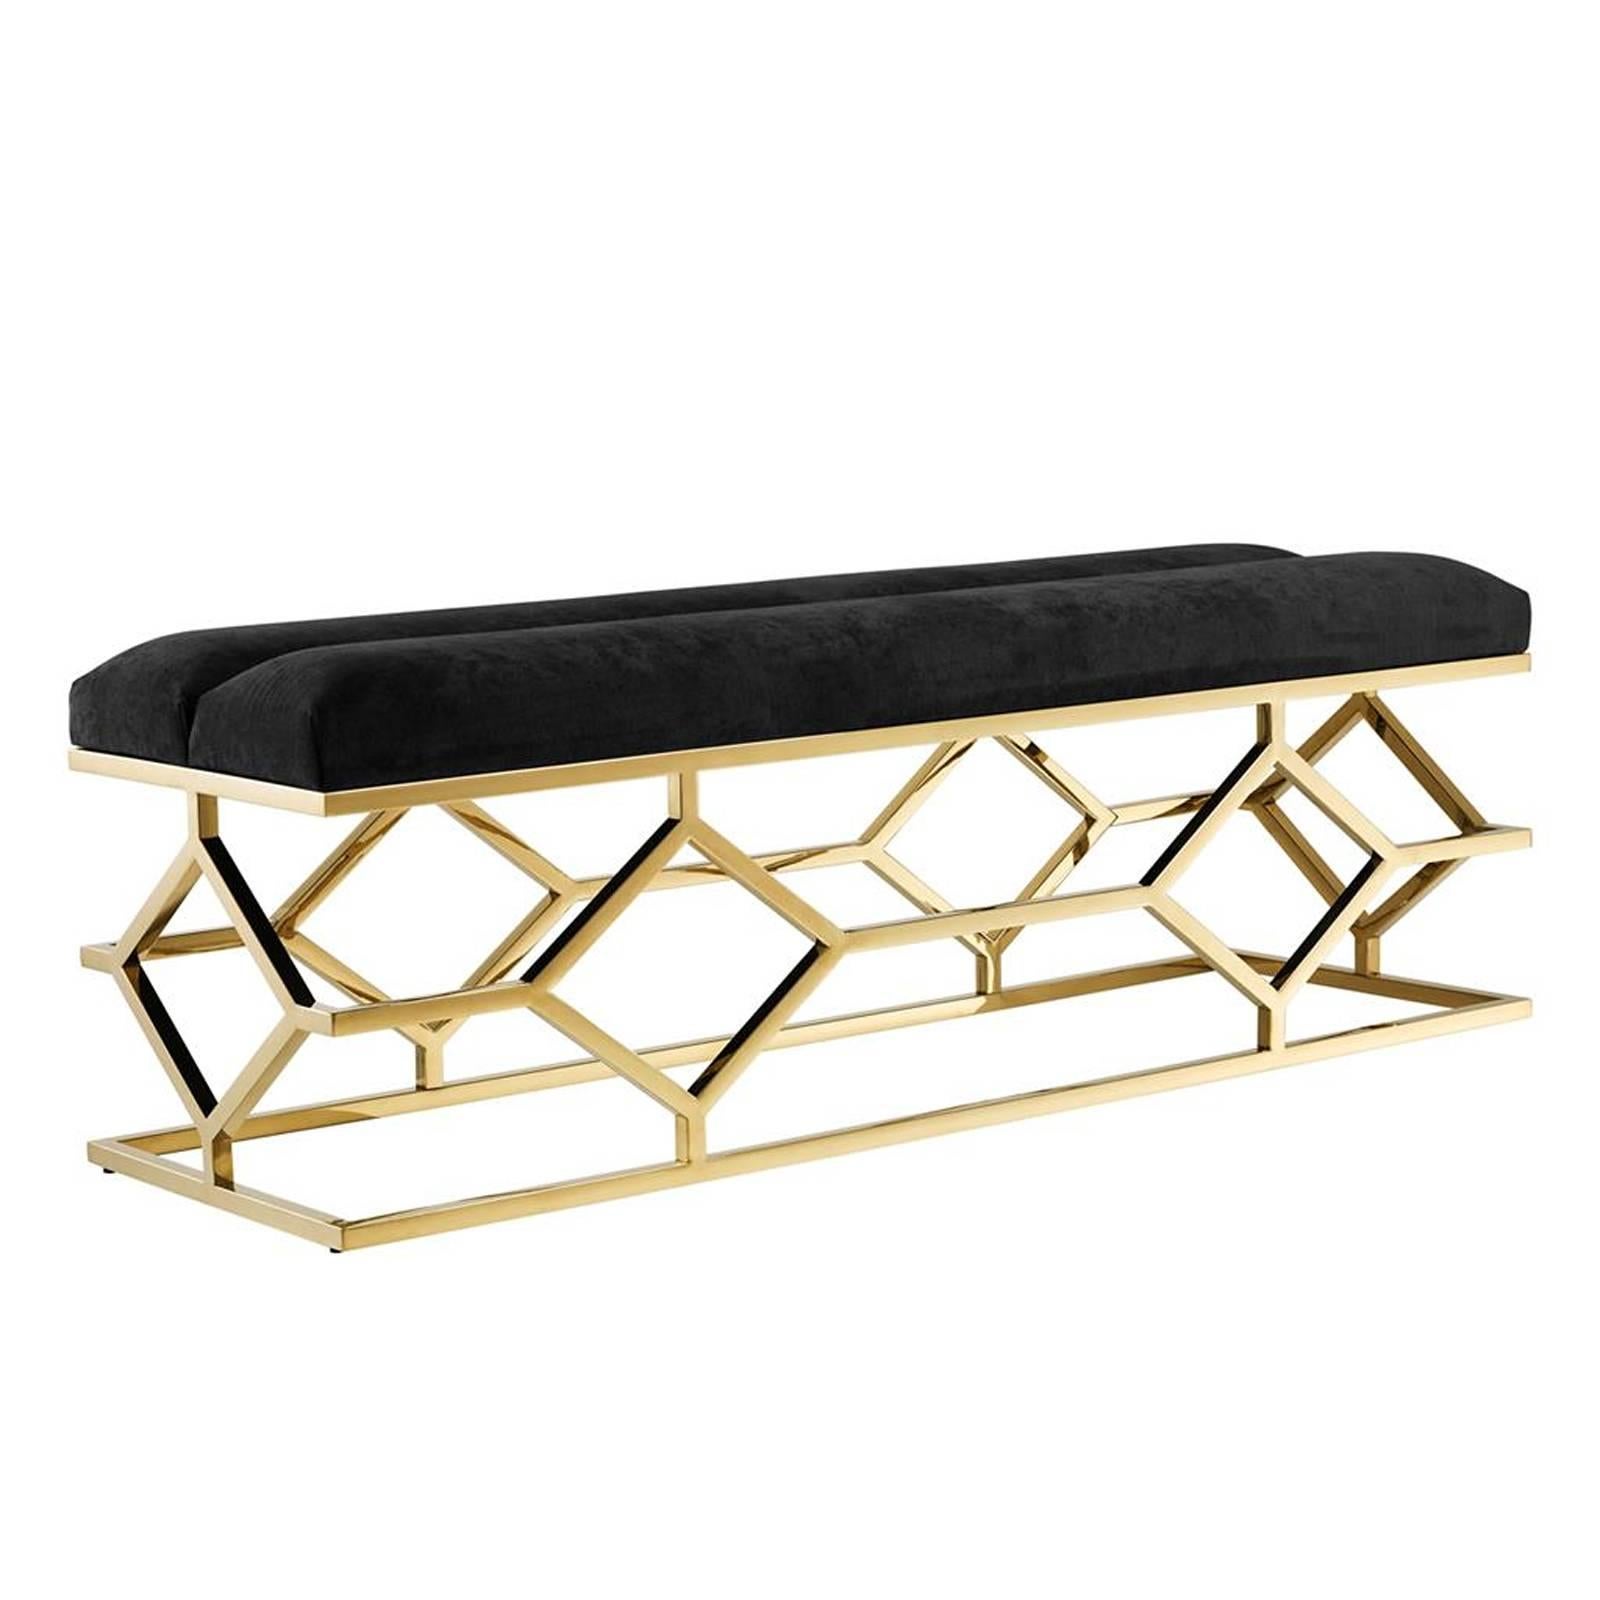 Bench Bee with structure in polished stainless steel
in gold finish. Seat upholstered with black velvet fabric.
Fire retardant treatment.
 